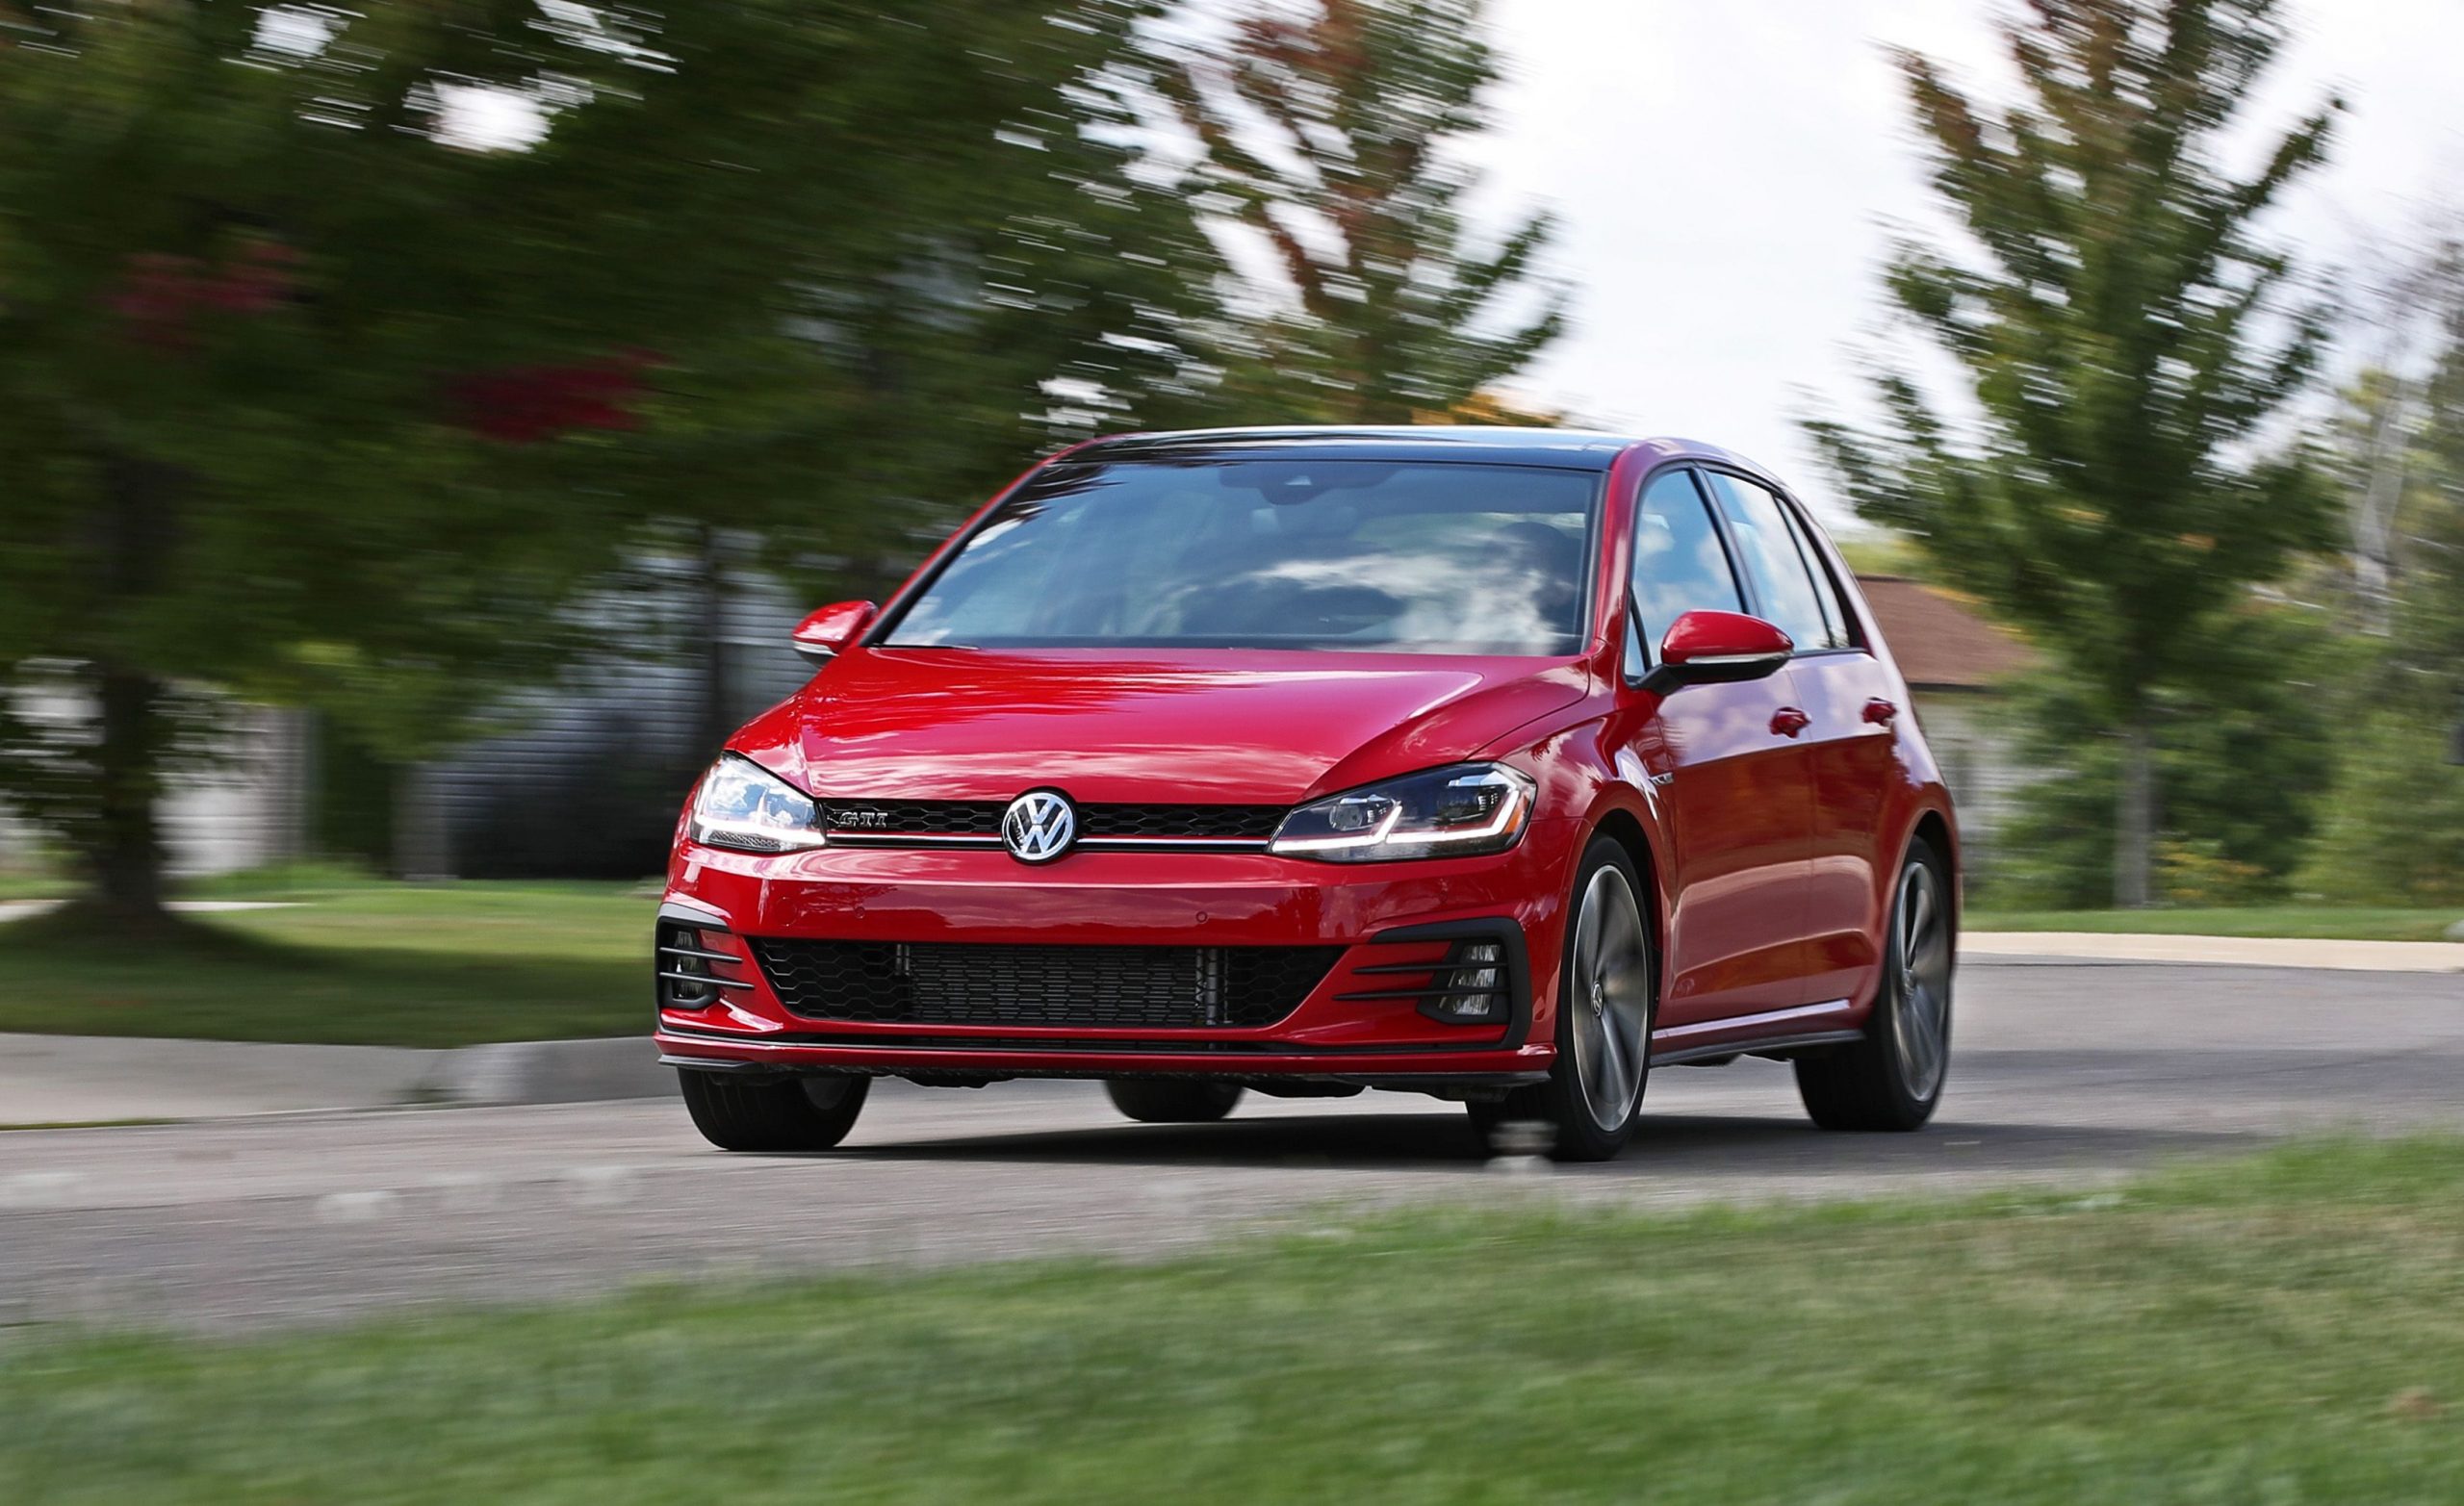 2022 Volkswagen Golf Gti Pictures, Reliability, Weight ...